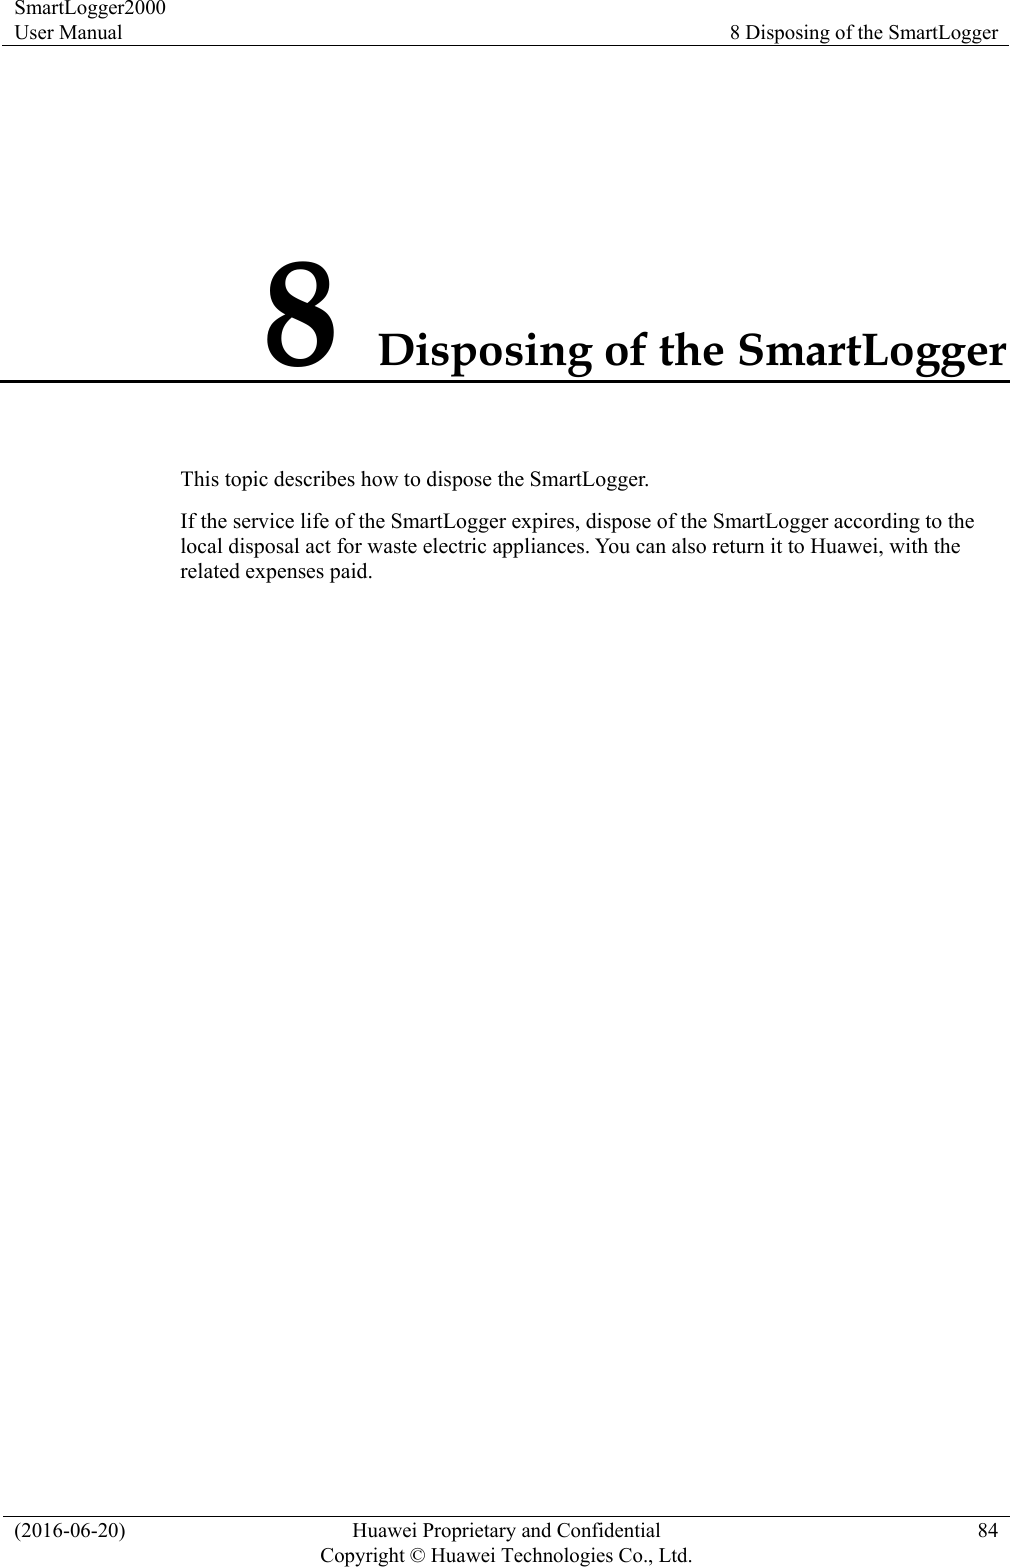 SmartLogger2000 User Manual  8 Disposing of the SmartLogger (2016-06-20)  Huawei Proprietary and Confidential         Copyright © Huawei Technologies Co., Ltd.84 8 Disposing of the SmartLogger This topic describes how to dispose the SmartLogger. If the service life of the SmartLogger expires, dispose of the SmartLogger according to the local disposal act for waste electric appliances. You can also return it to Huawei, with the related expenses paid. 